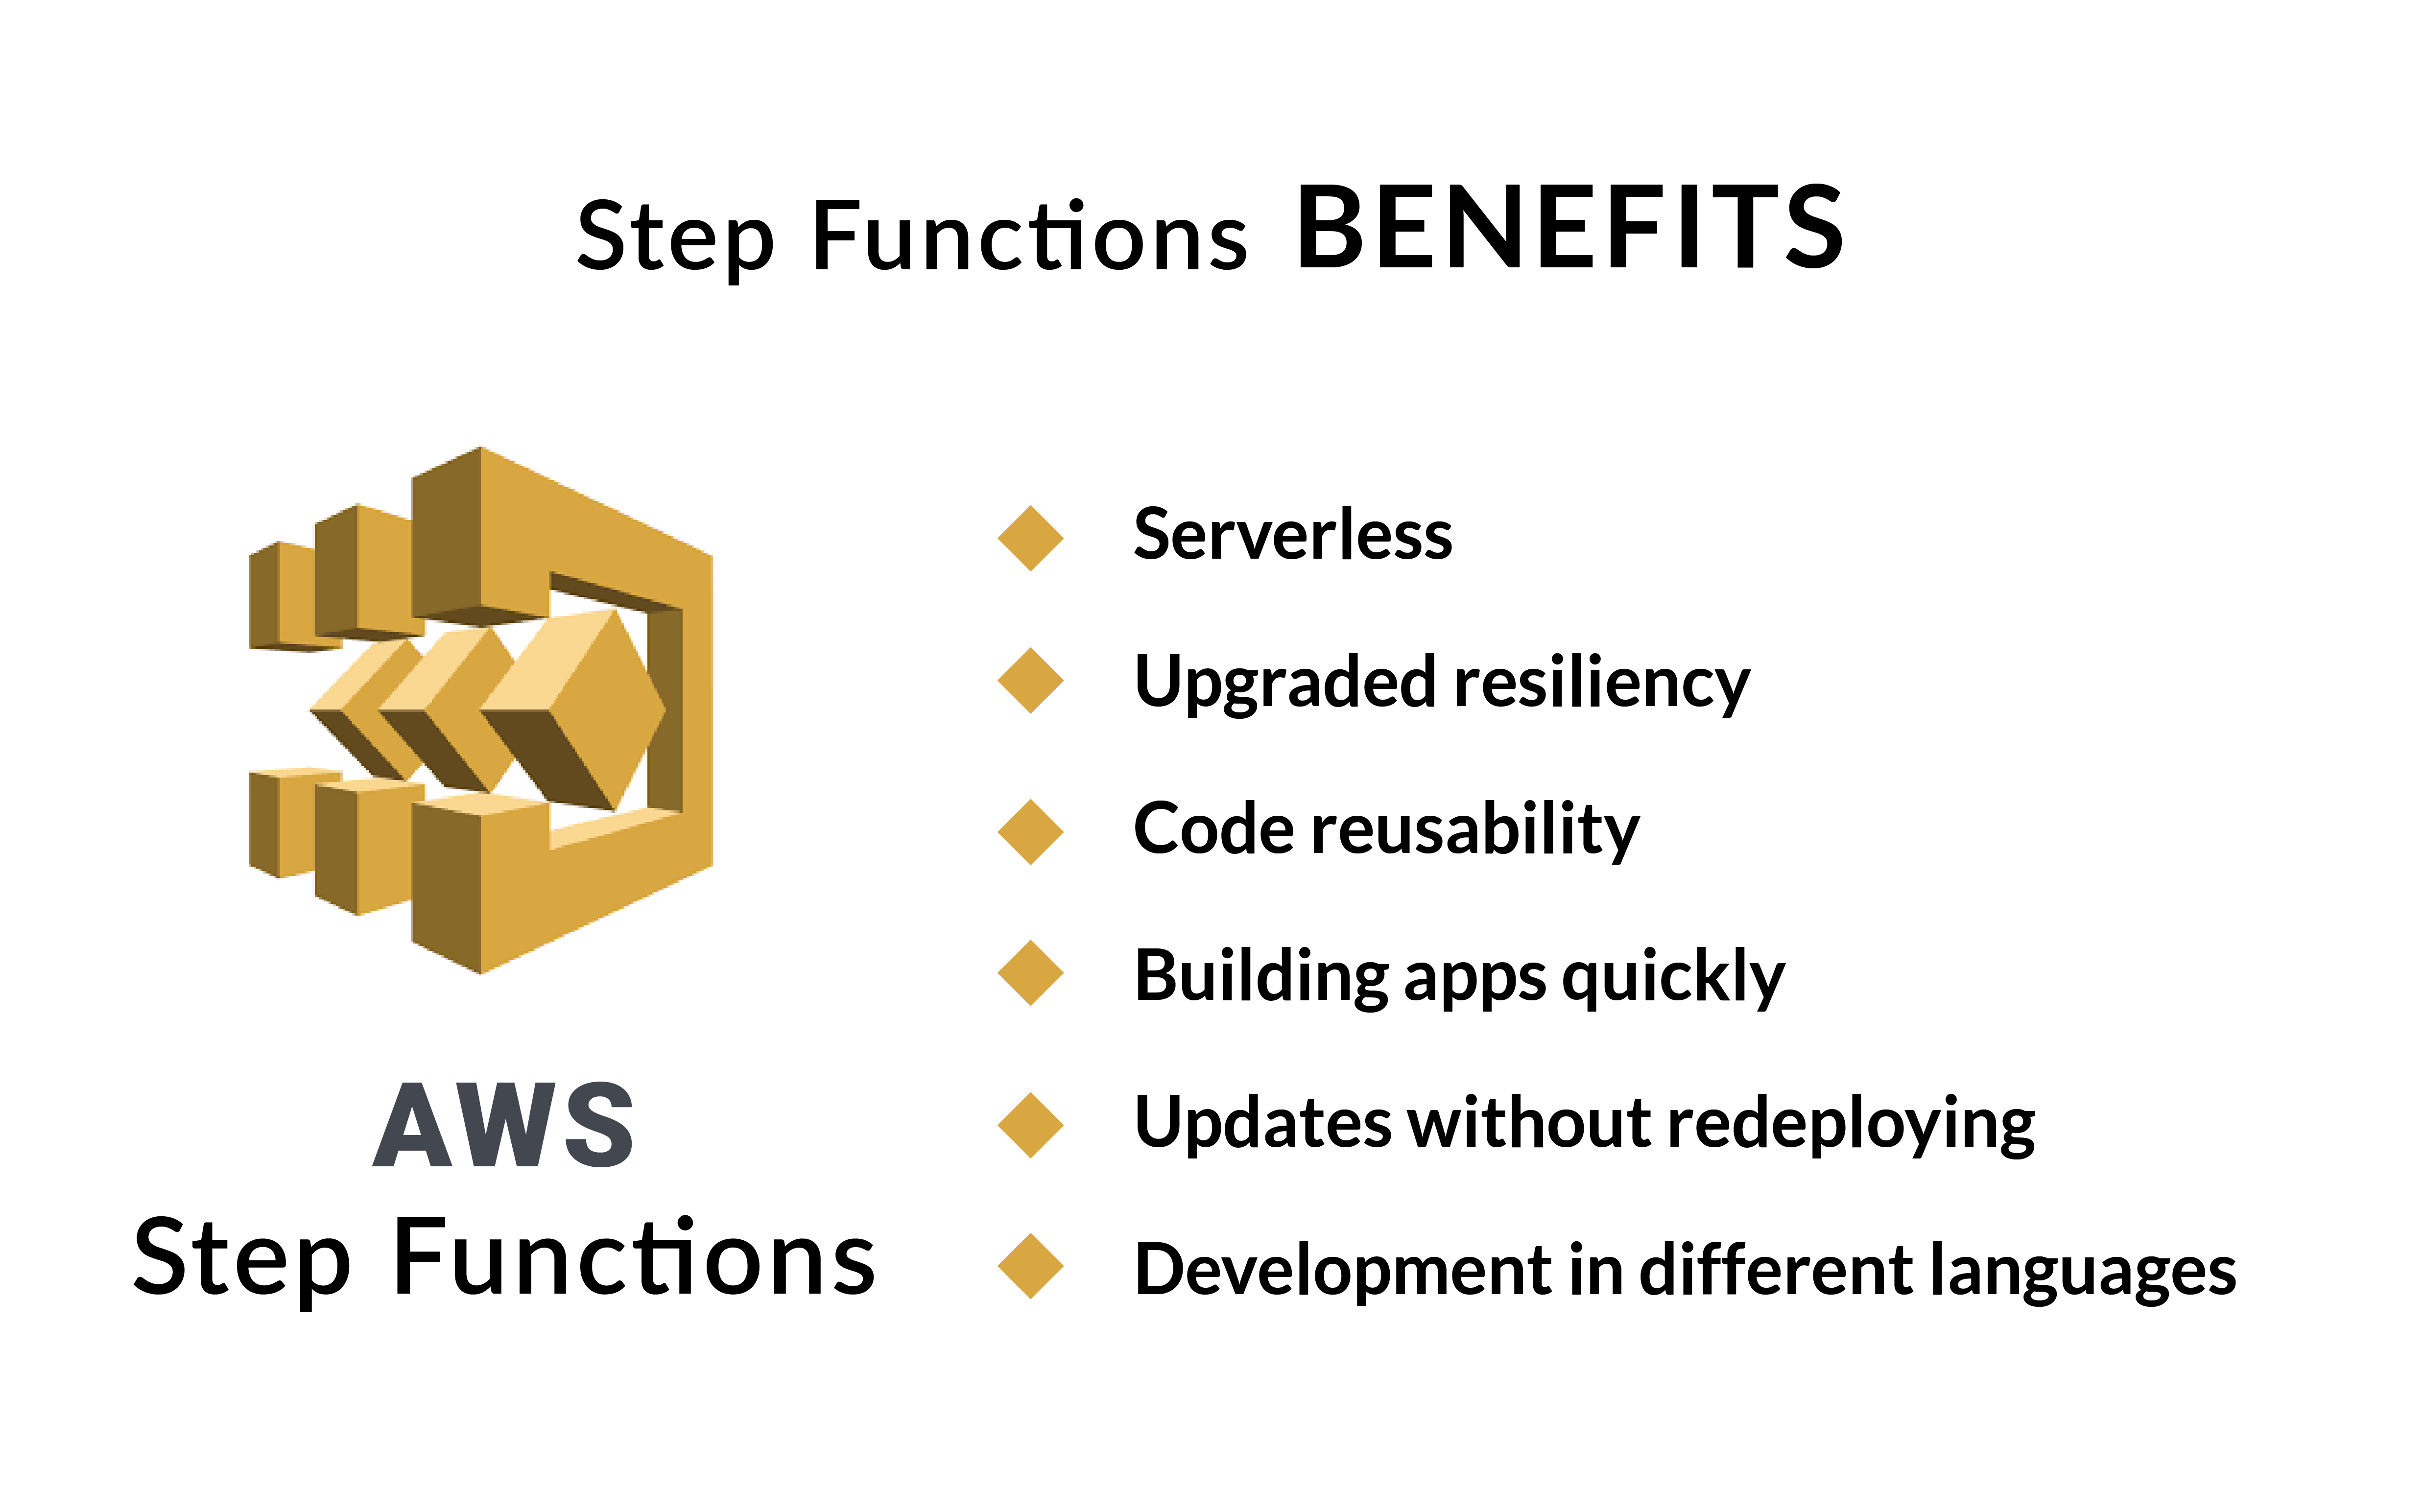 Step Functions benefits